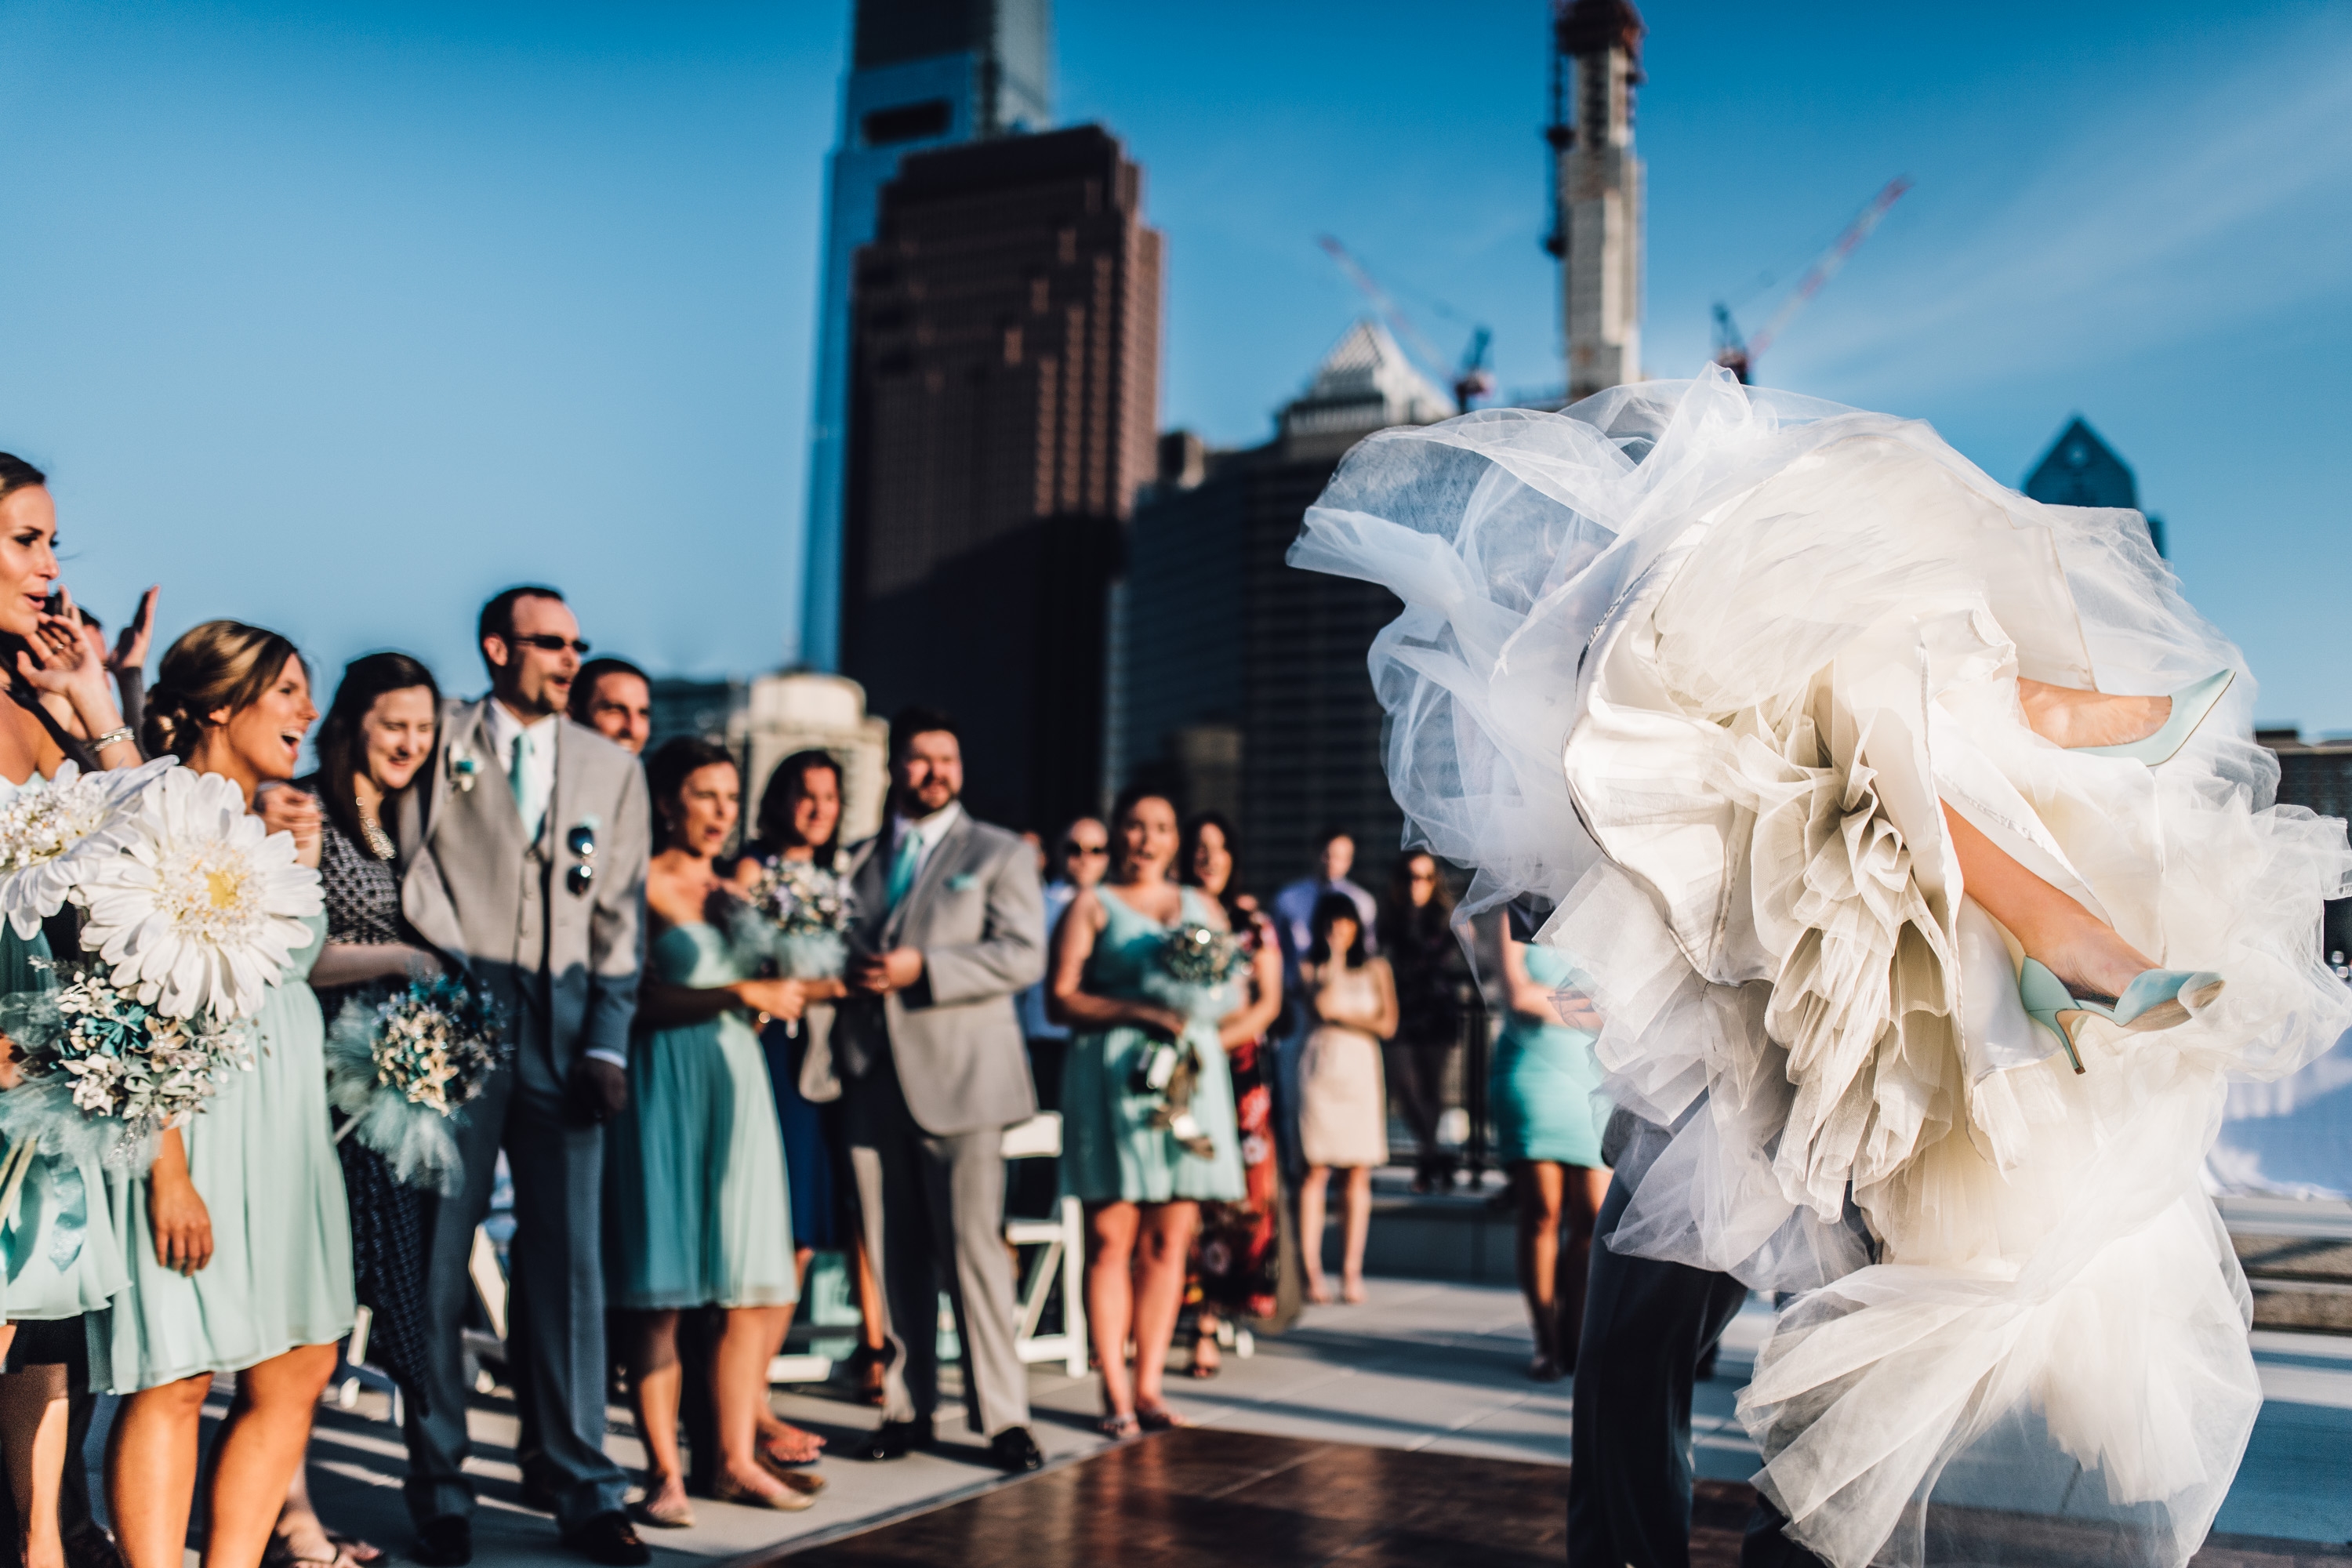 A Few Of The Best Wedding Photographers Share Their Favorite Images